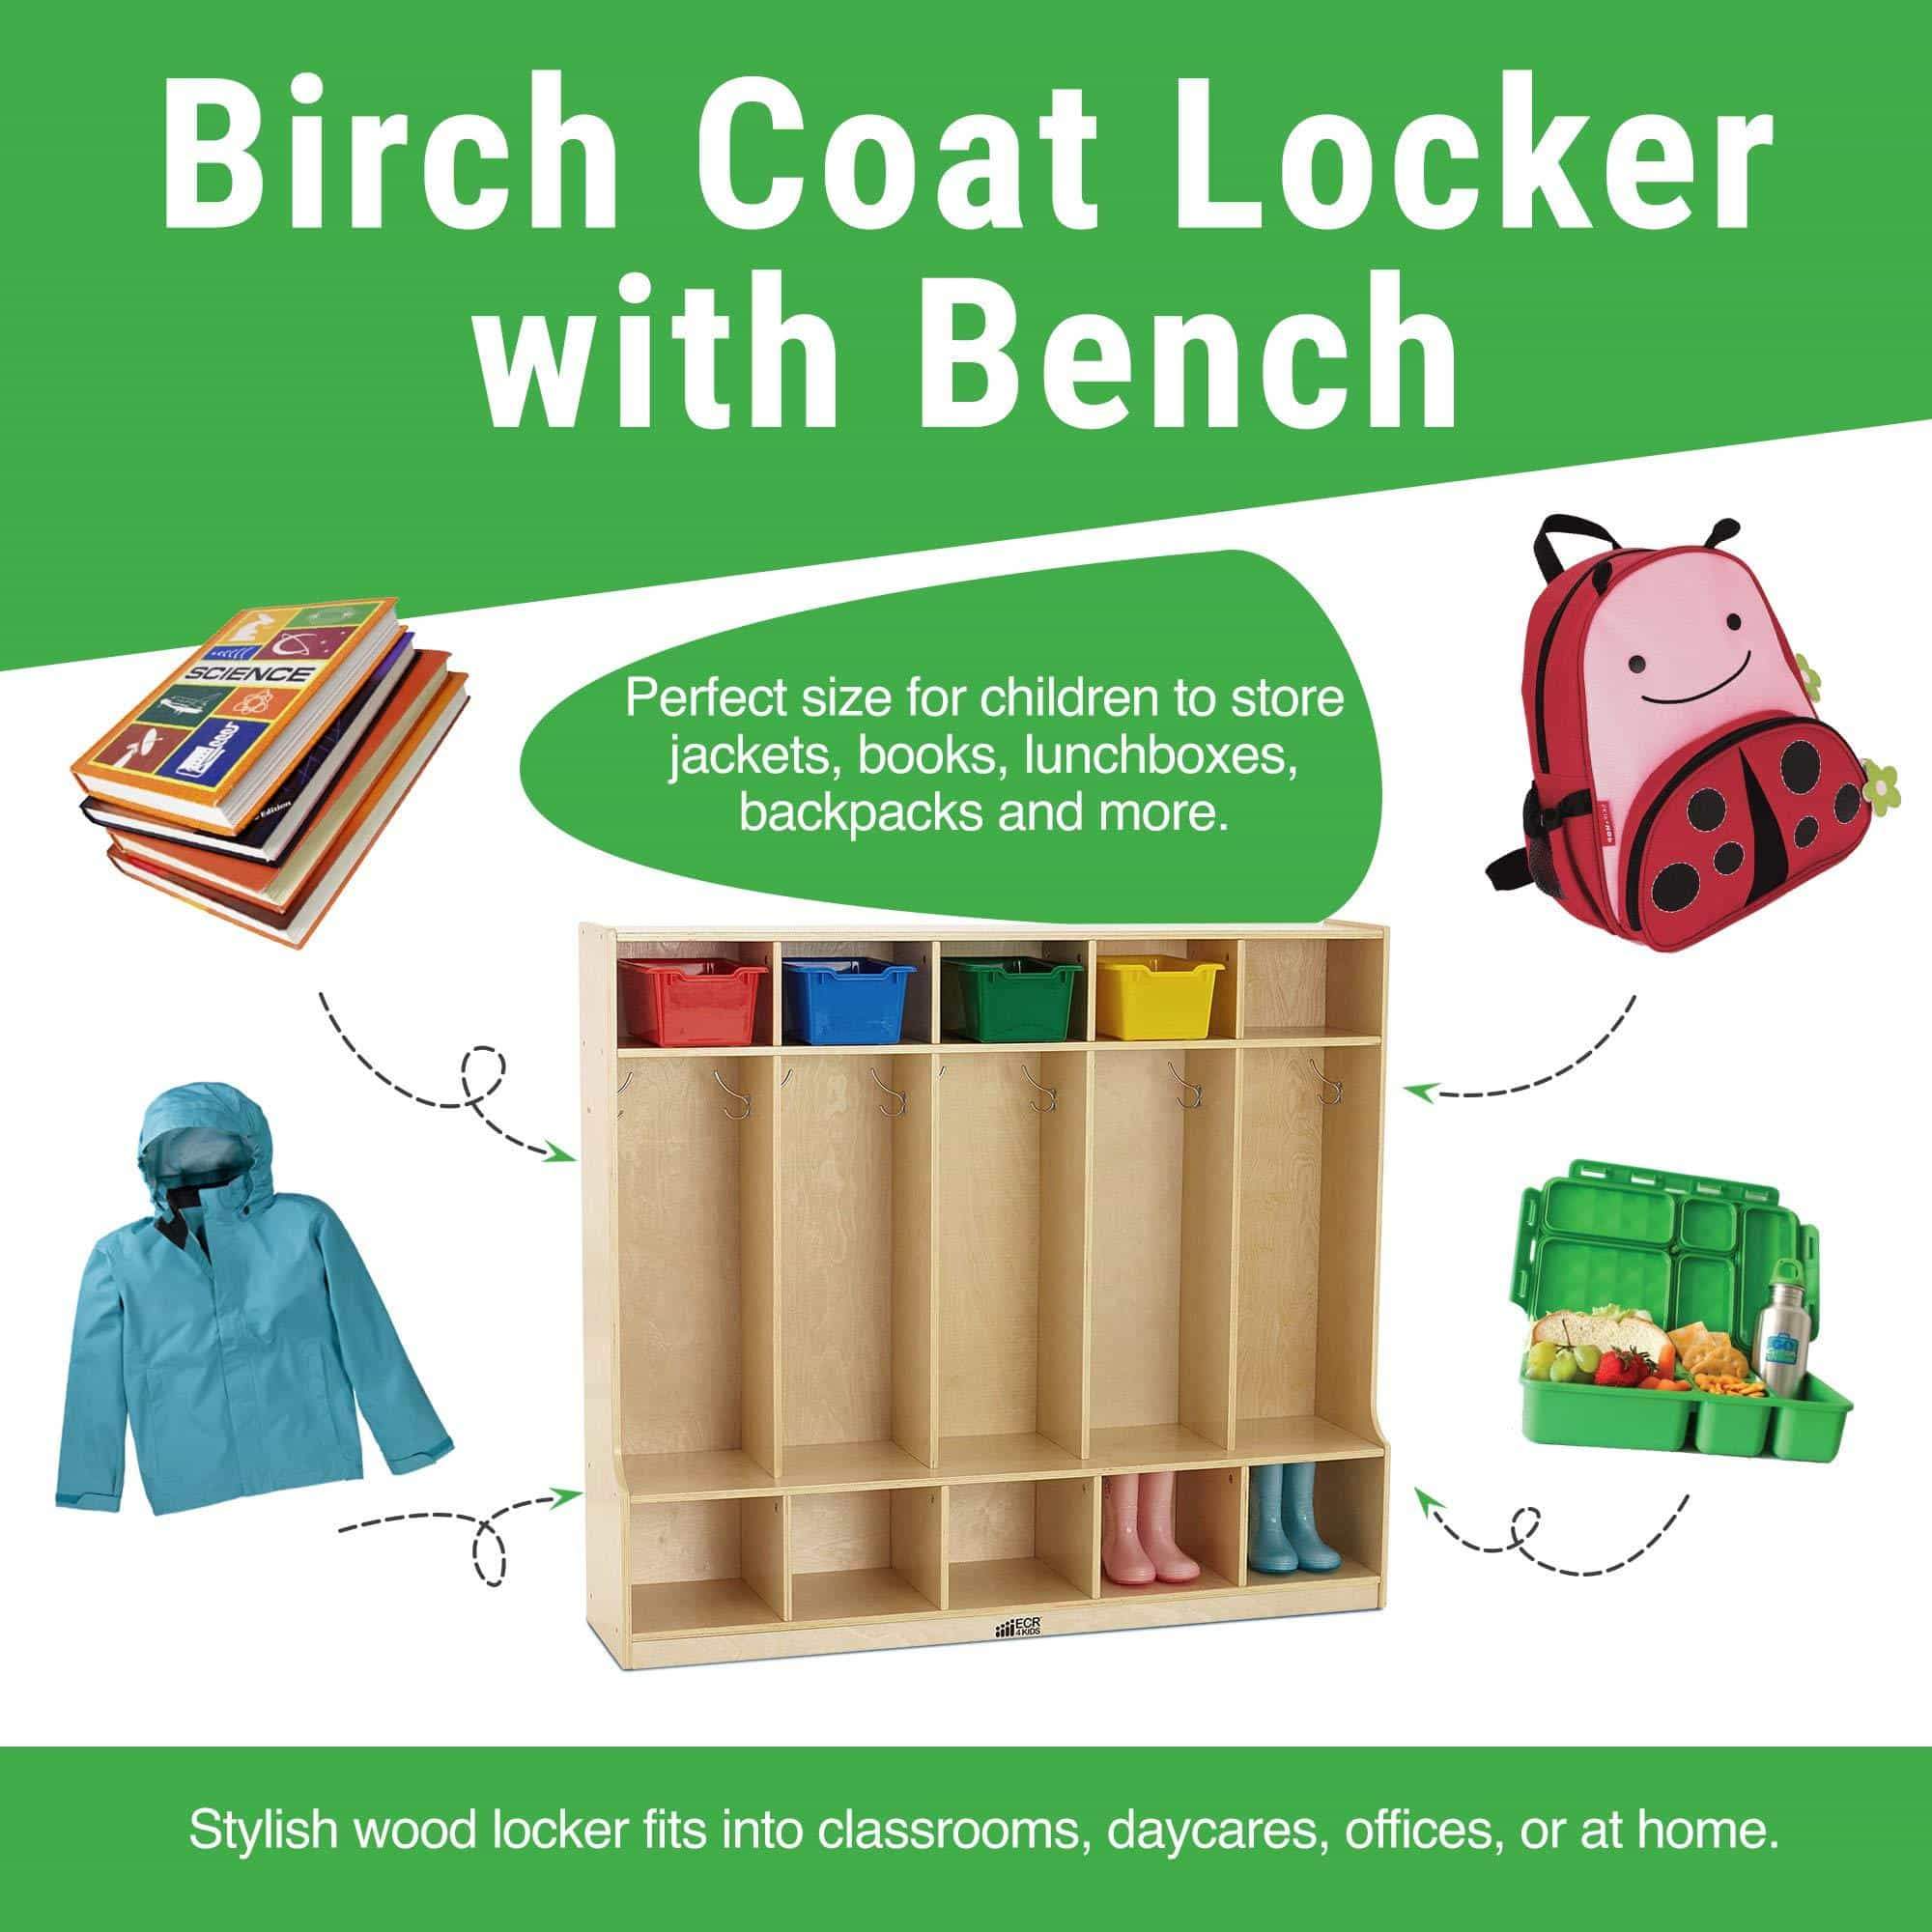 Order now ecr4kids birch school coat locker for toddlers and kids 5 section coat locker with bench and cubby storage shelves commercial or personal use certified and safe 48 high natural